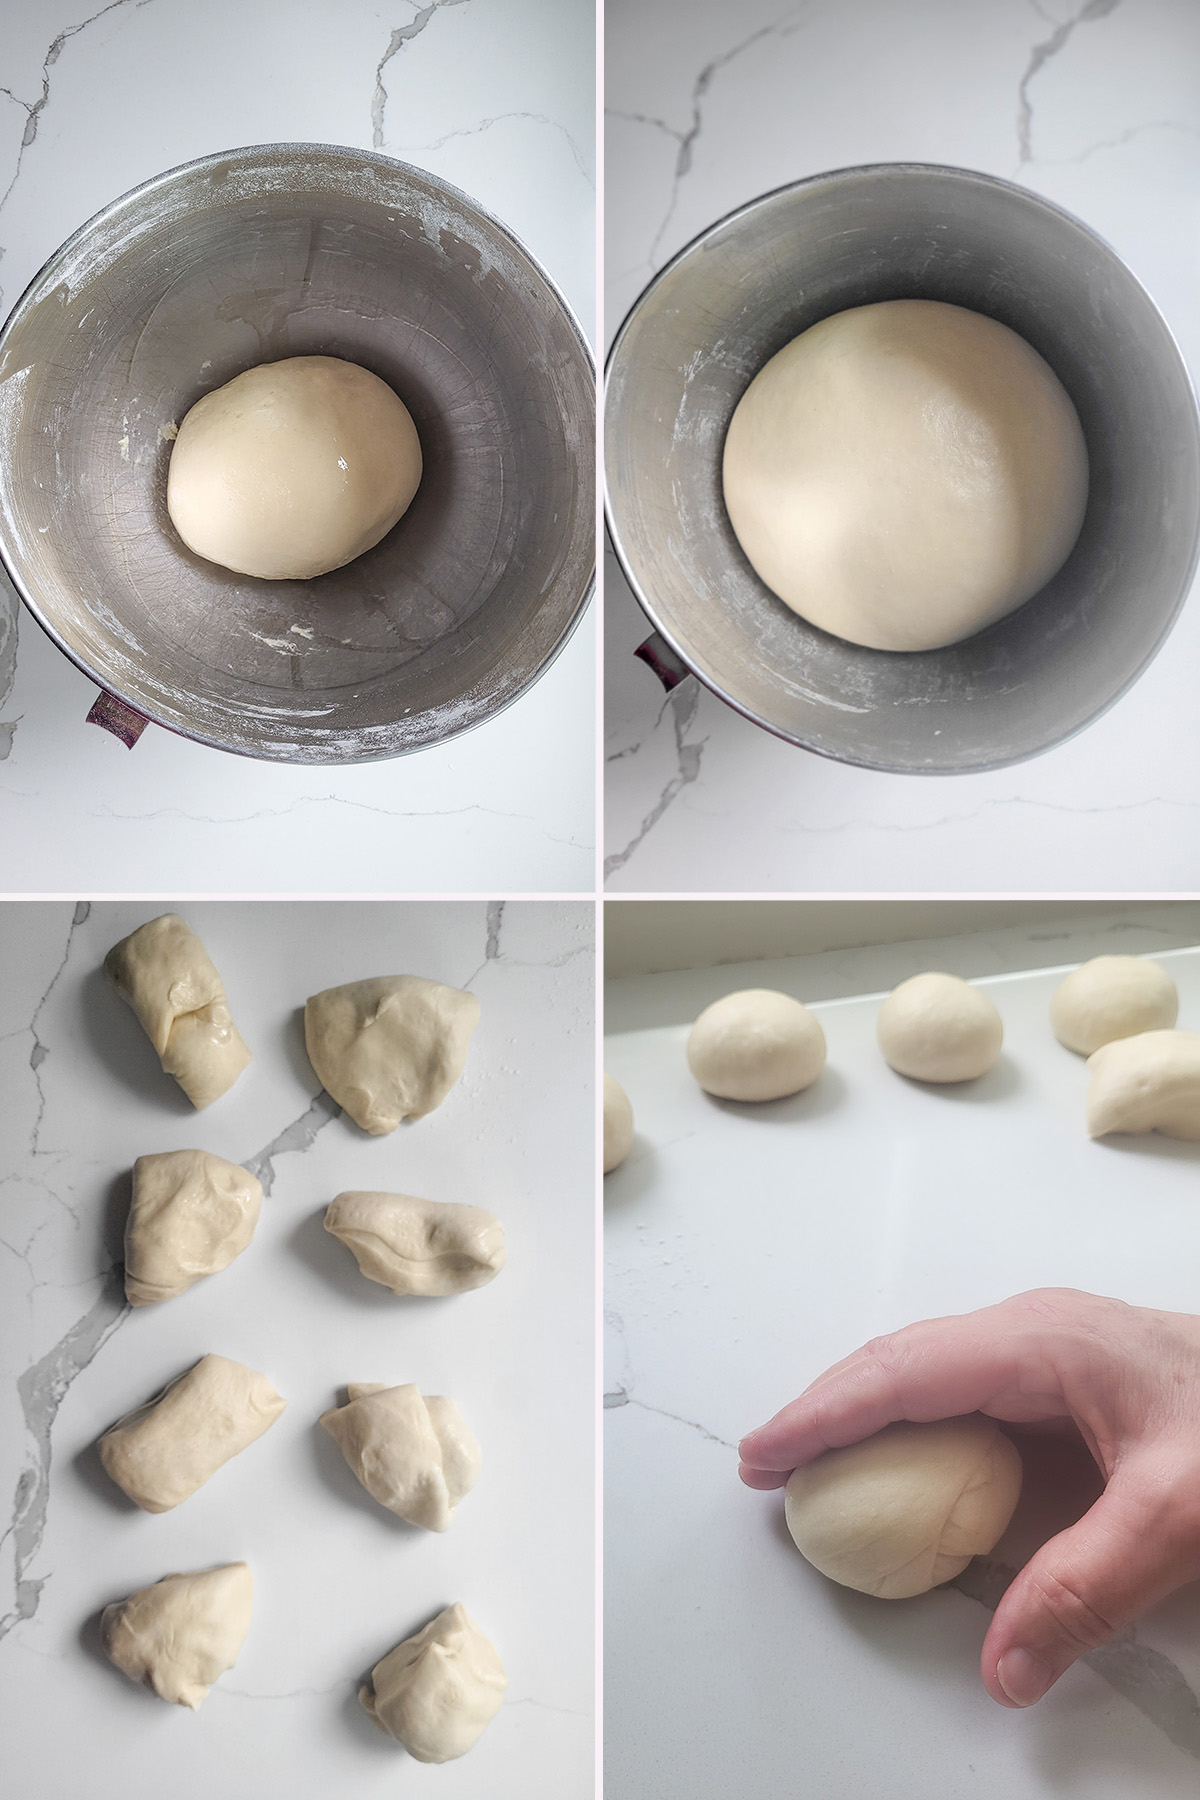 Bread dough in a mixing bowl before and after rising. Pieces of dough rolled into balls.